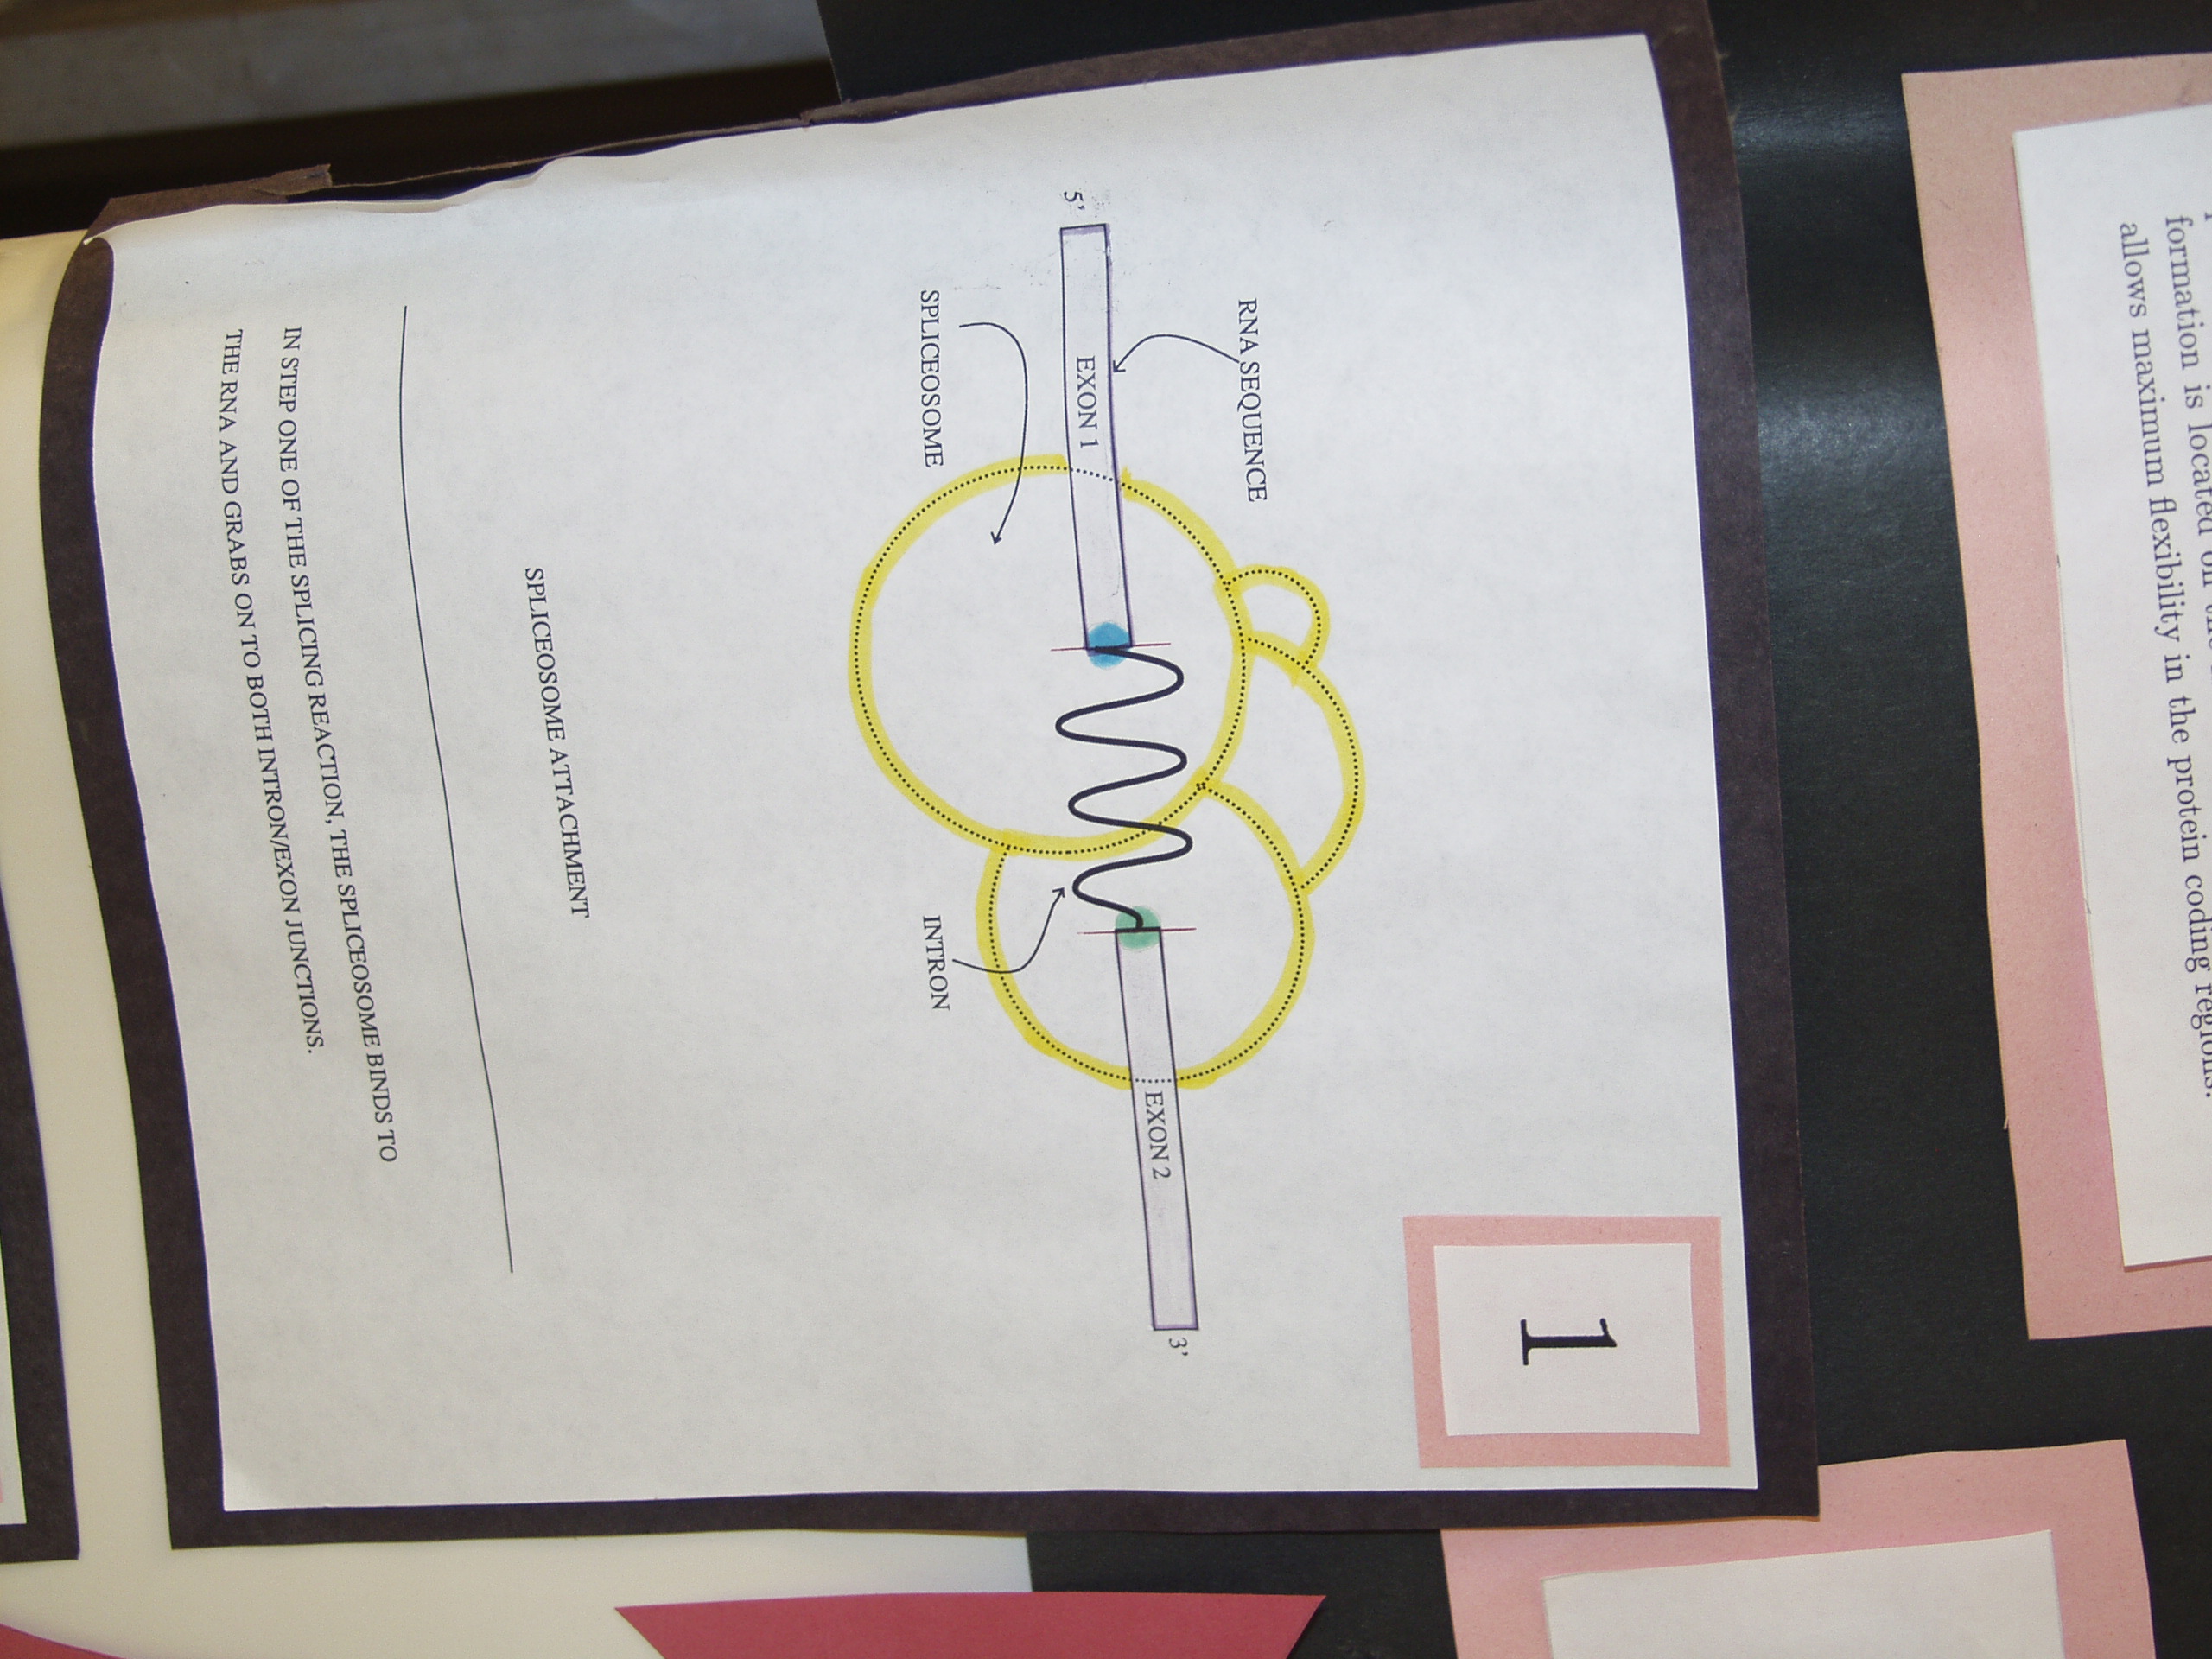 P8237788.JPG Photograph of Mike Stephen's 1990 science fair poster 'Information analysis of RNA splice sites'